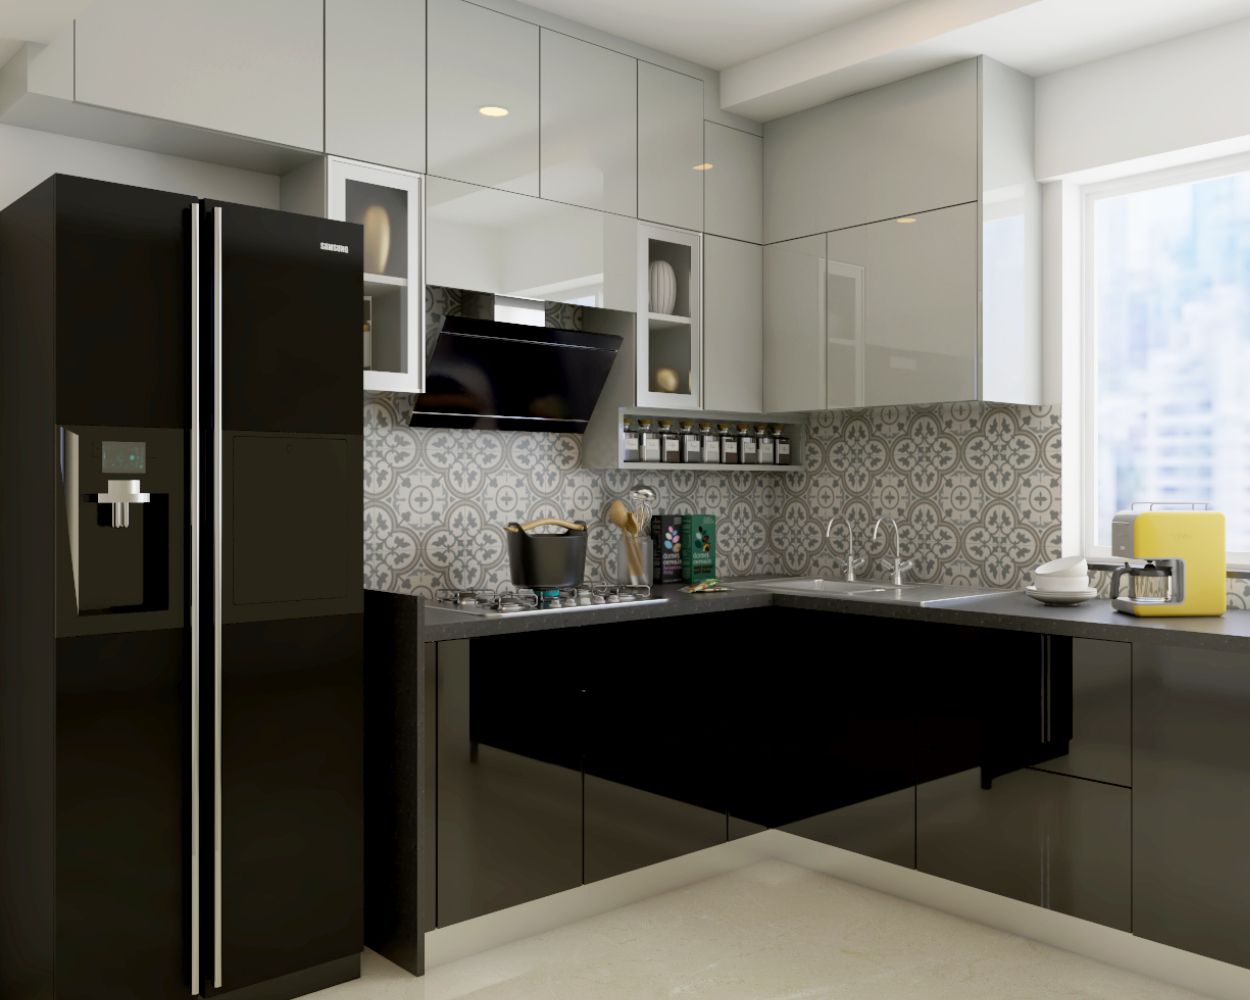 Modern Grey And Black Modular Indian Kitchen Design With An L-Shape Layout